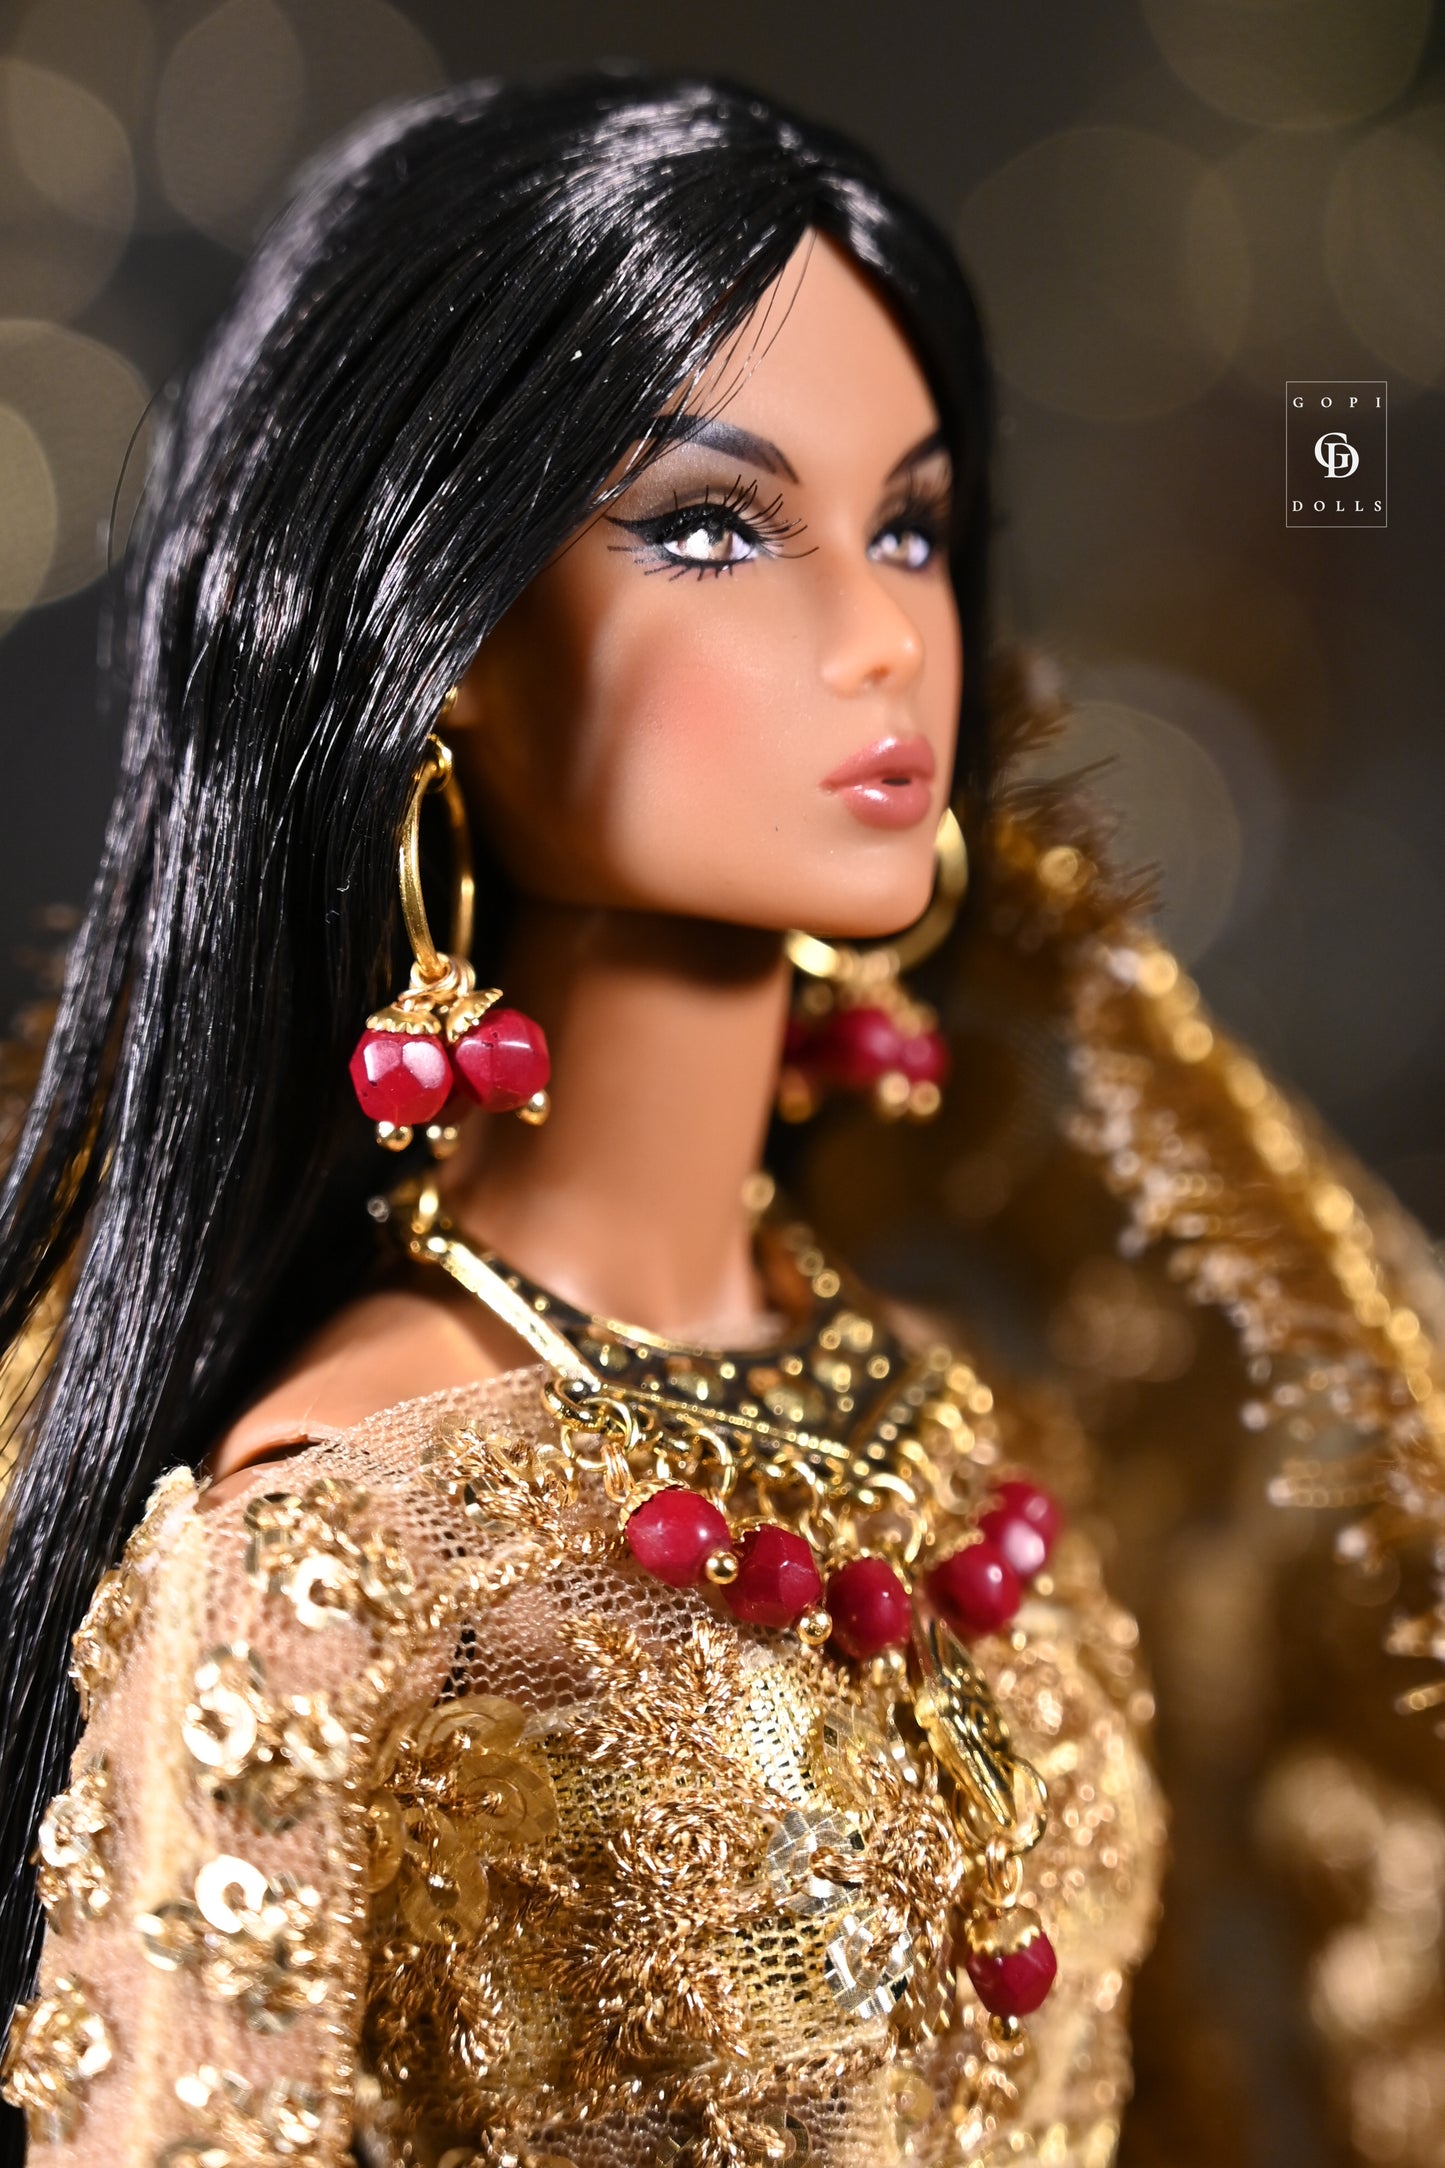 Bokeh Coral | 2 Piece set | Doll Earrings & Doll Necklace